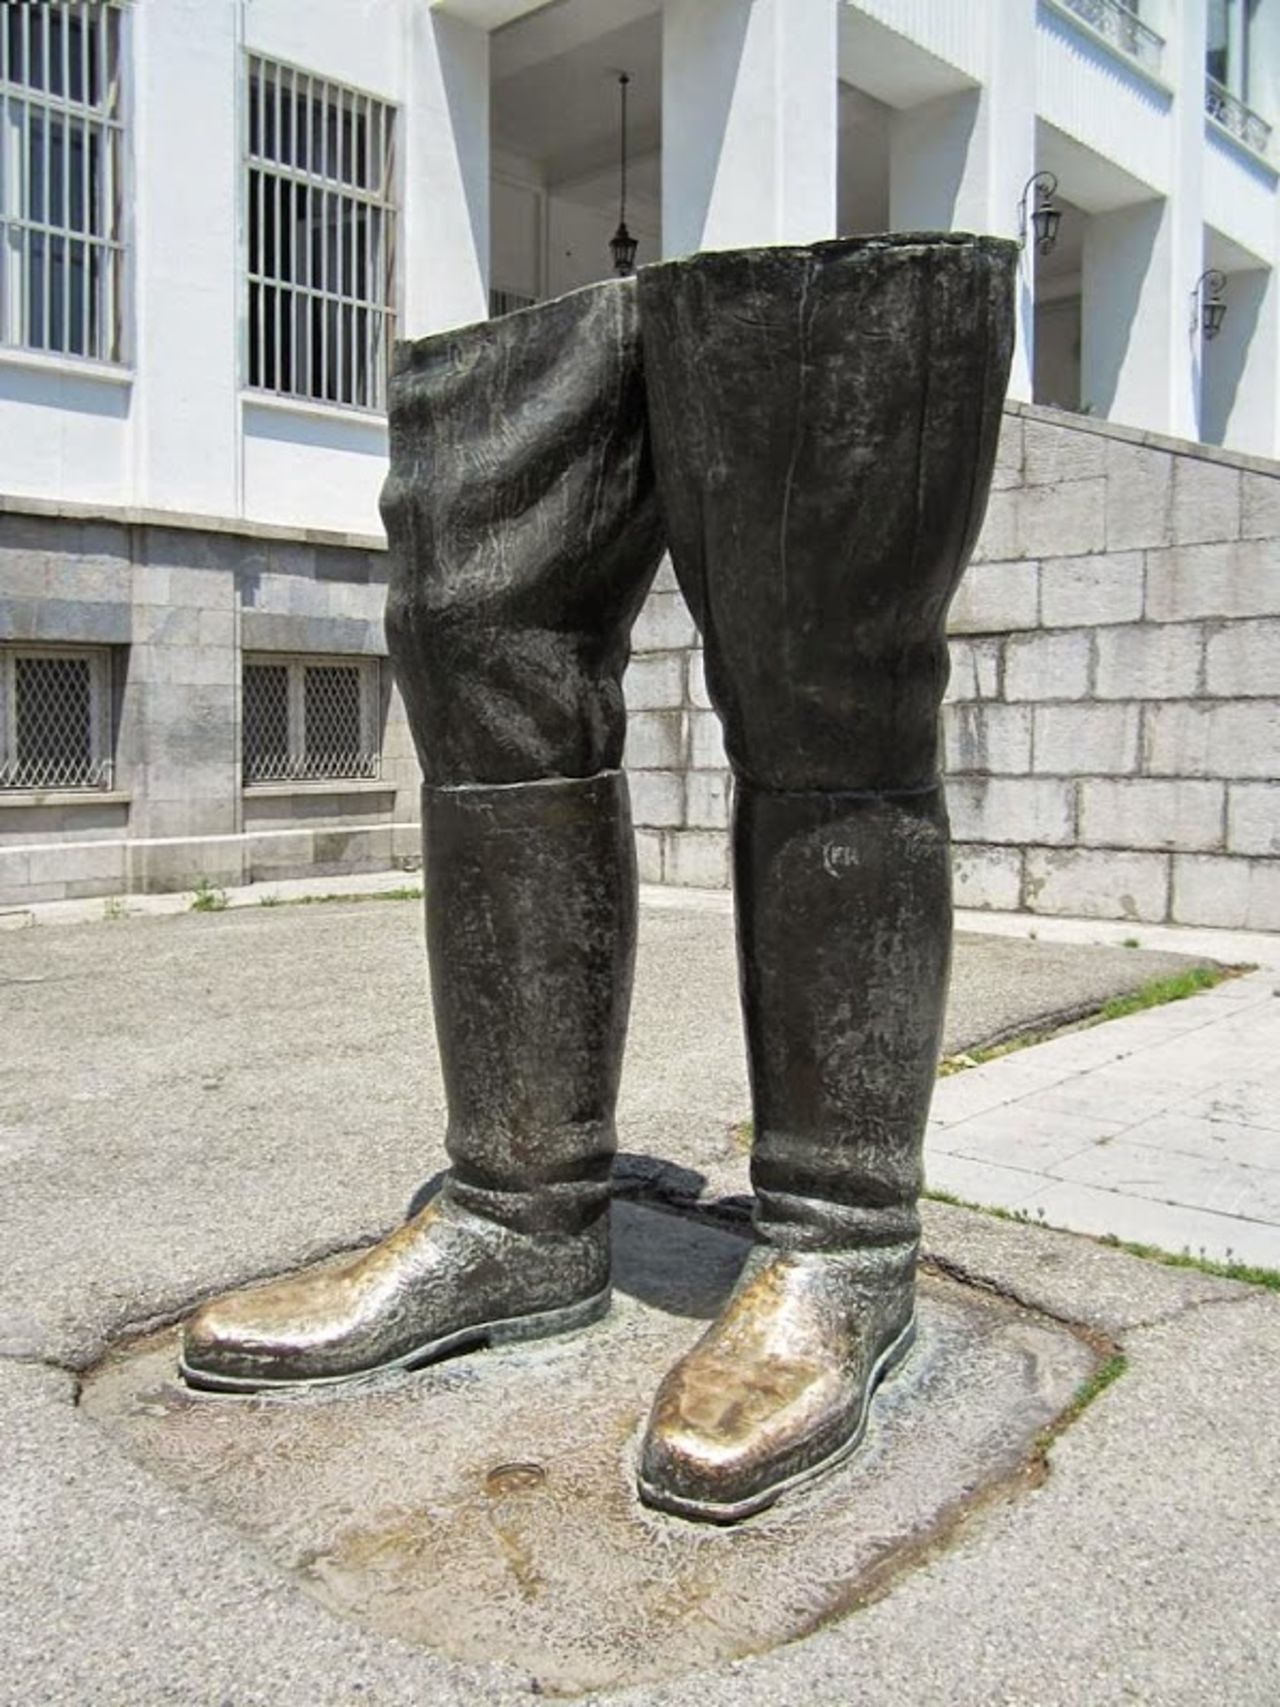 Only two bronze boots remain from a statue of Reza Shah, father of the last shah, outside the White Palace in the Saadabad Palace complex in Tehran.